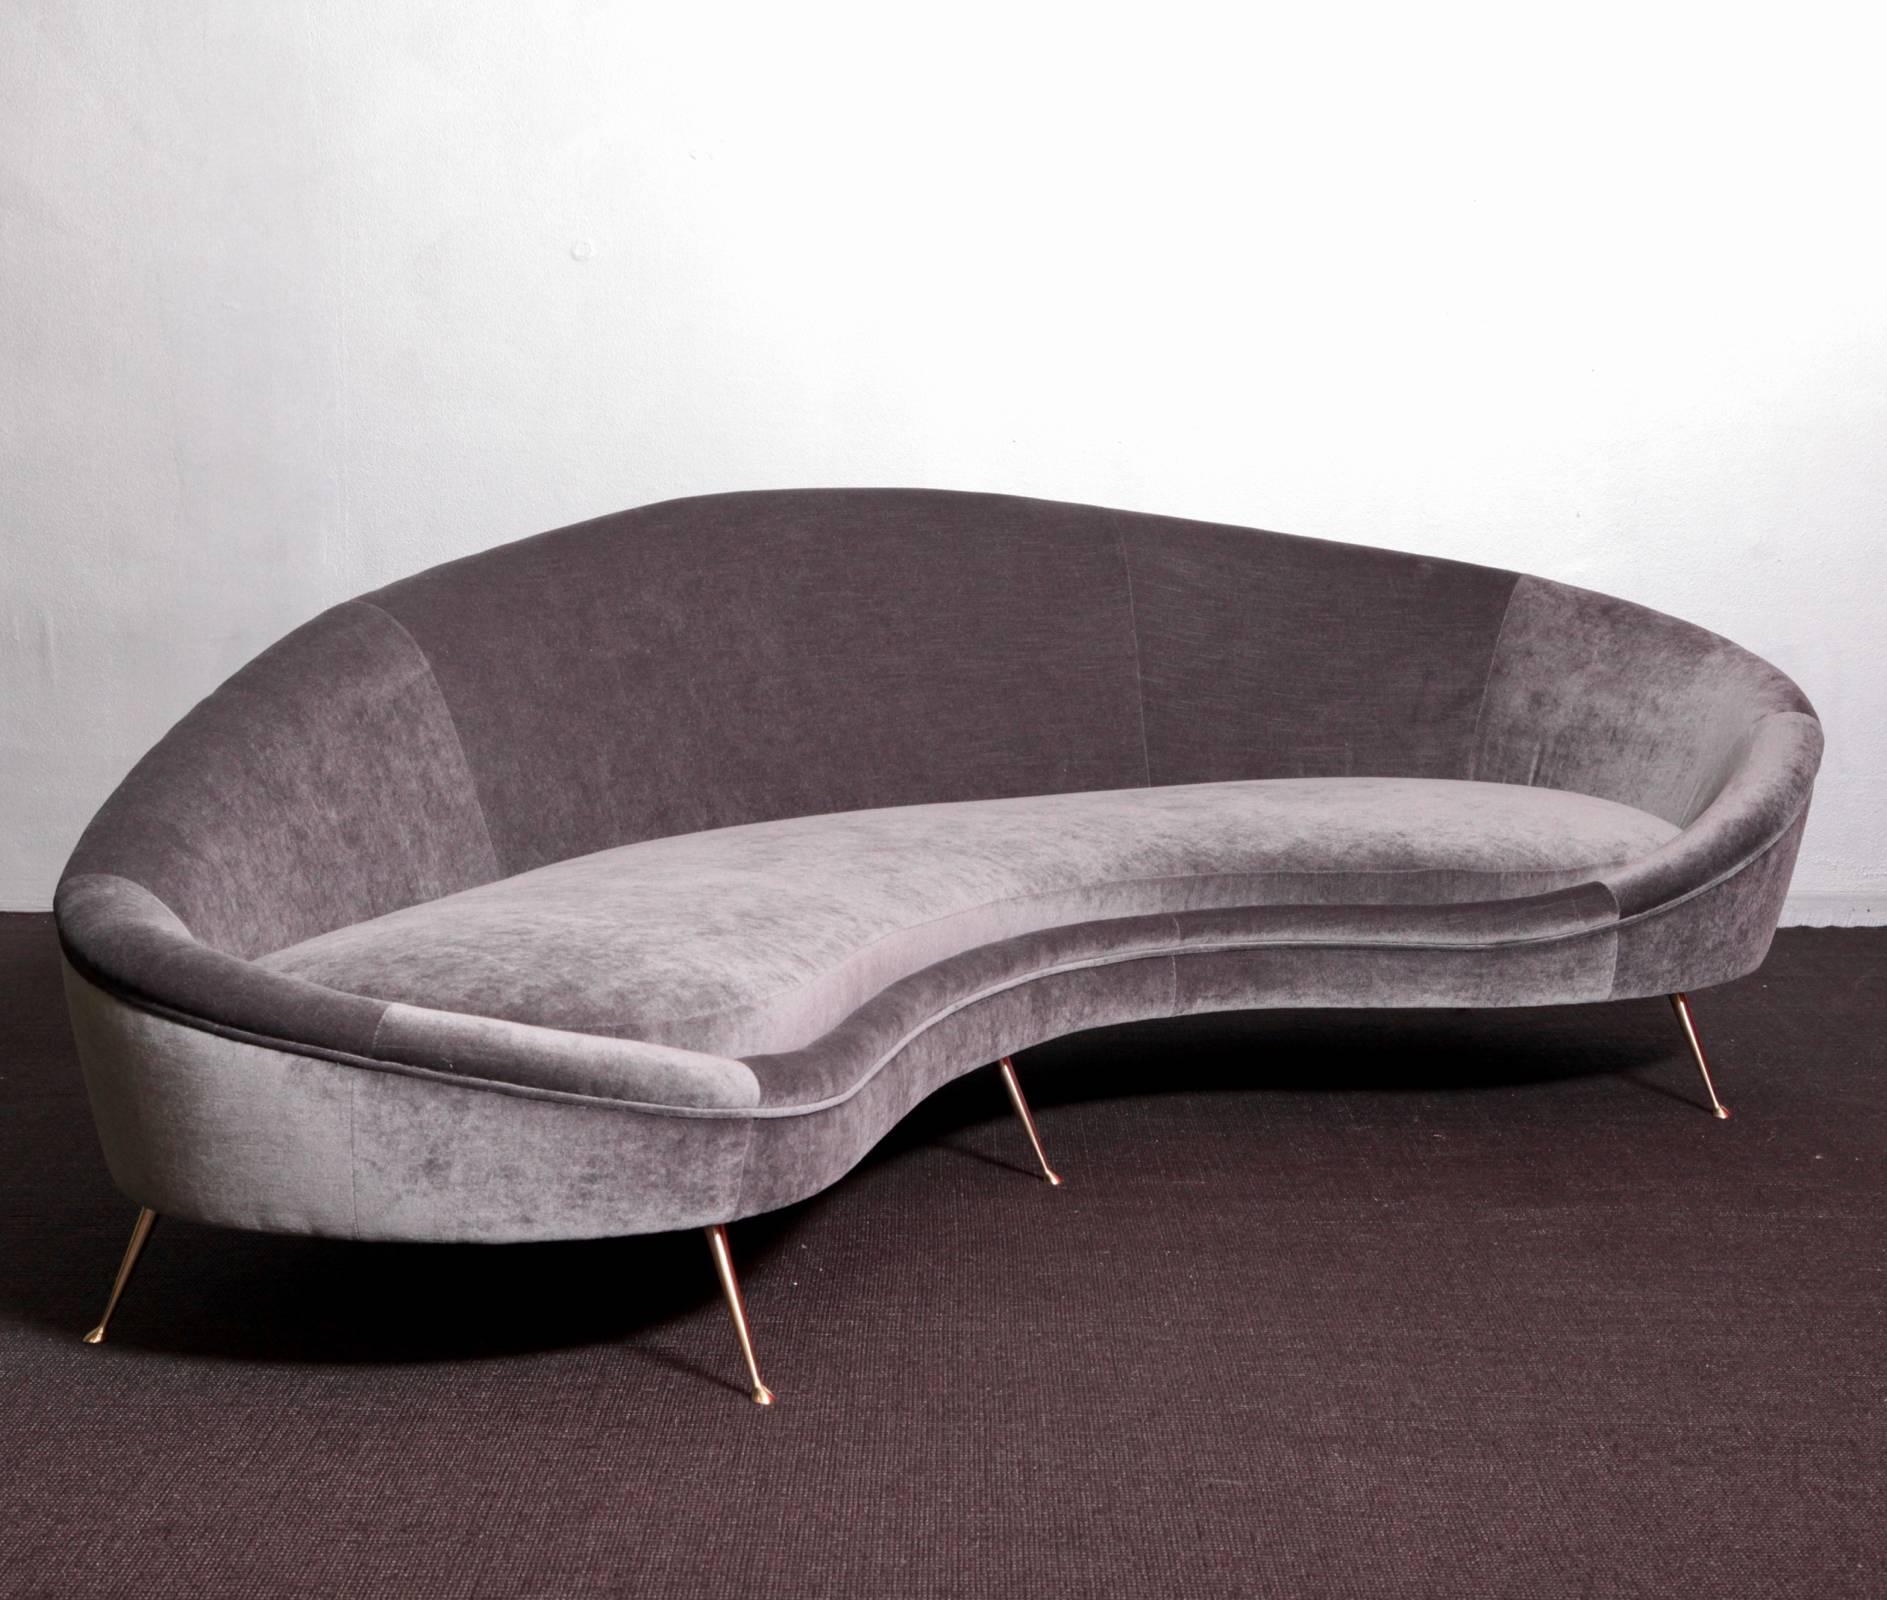 Wonderful huge curved sofa in the manner of Ico Parisi. The sofa is newly upholstered in velvet and it's in a very good condition. The sofa is a real eye catcher in each living room or lobby. The upholstery isn’t done hard so you don't bog in the